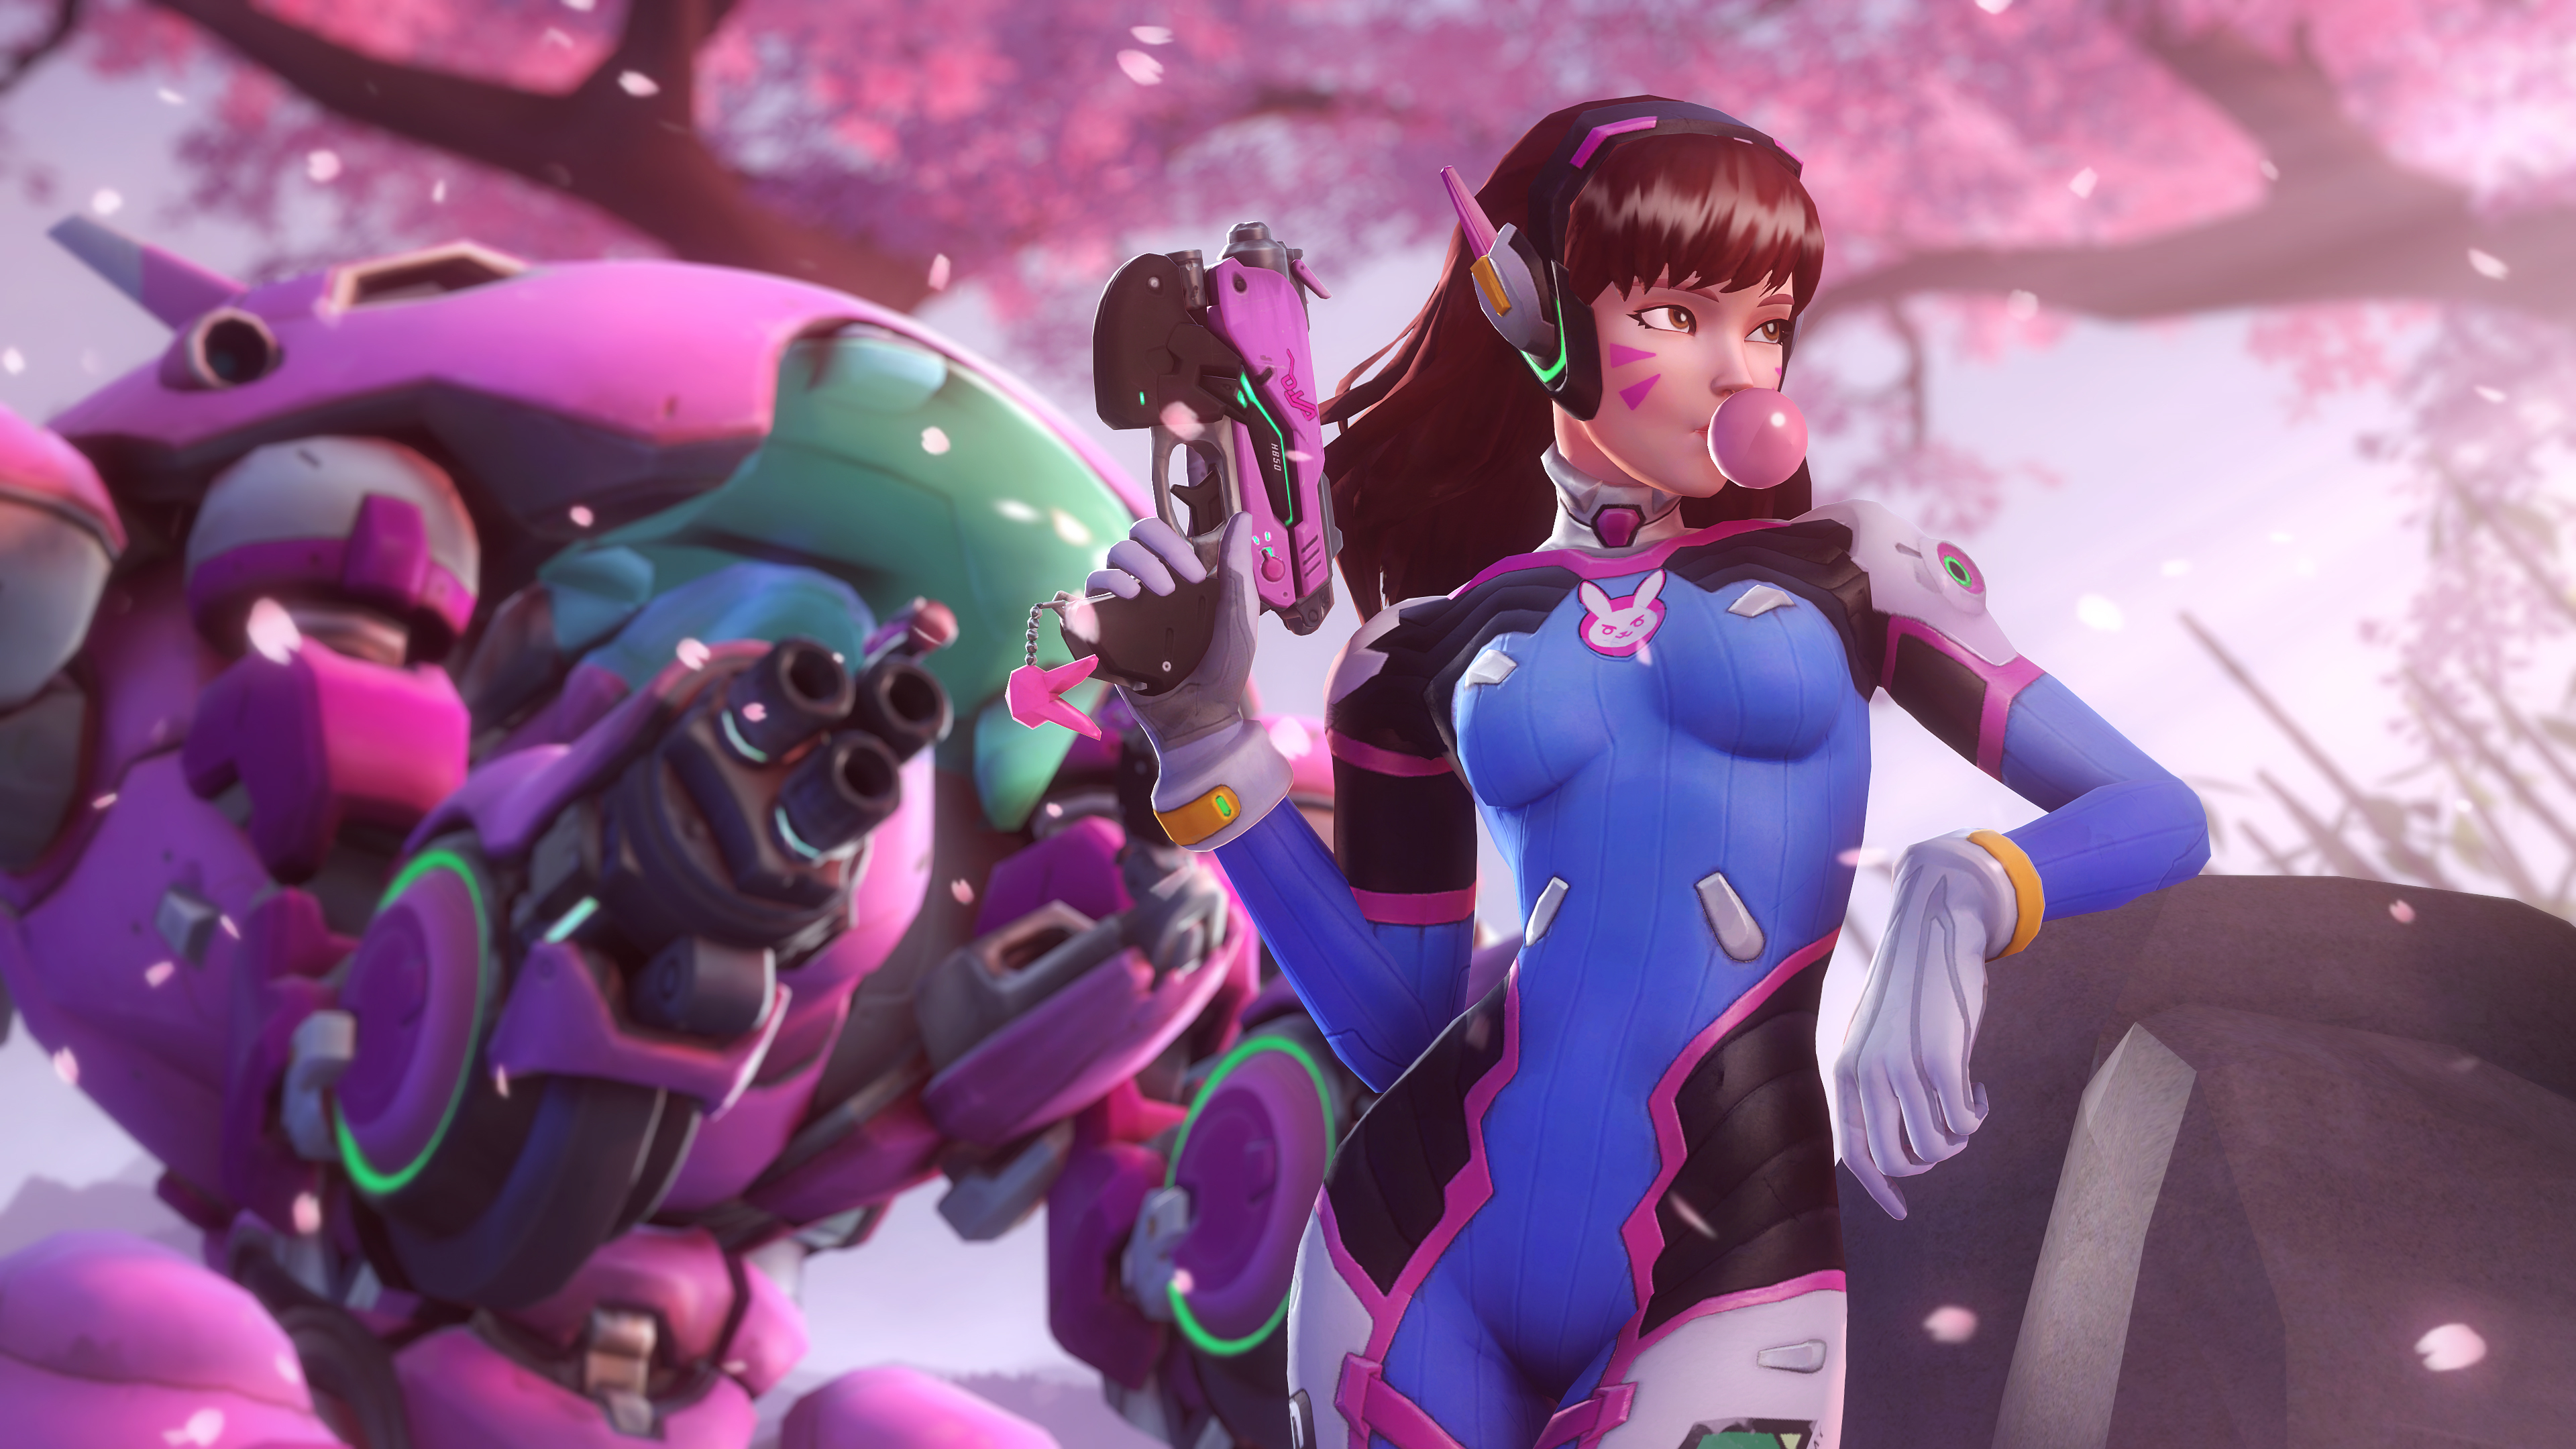 3840x2160 370+ (Overwatch) HD Wallpapers and Backgrounds